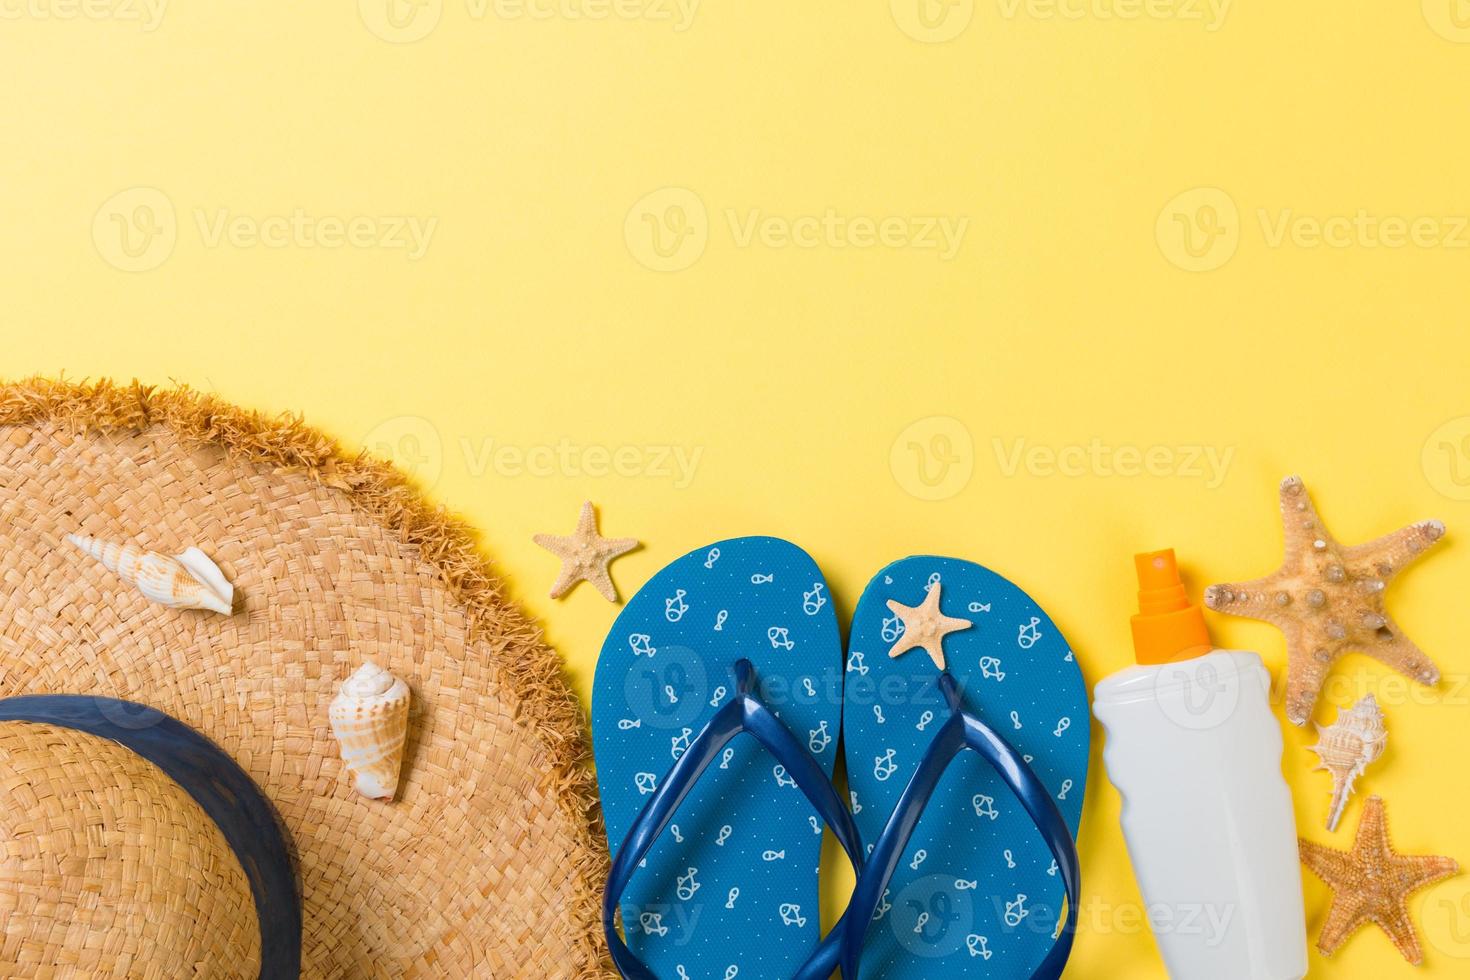 flip flops, straw hat, starfish, sunscreen bottle, body lotion spray on yellow background top view . flat lay summer beach sea accessories background, vaation concept photo